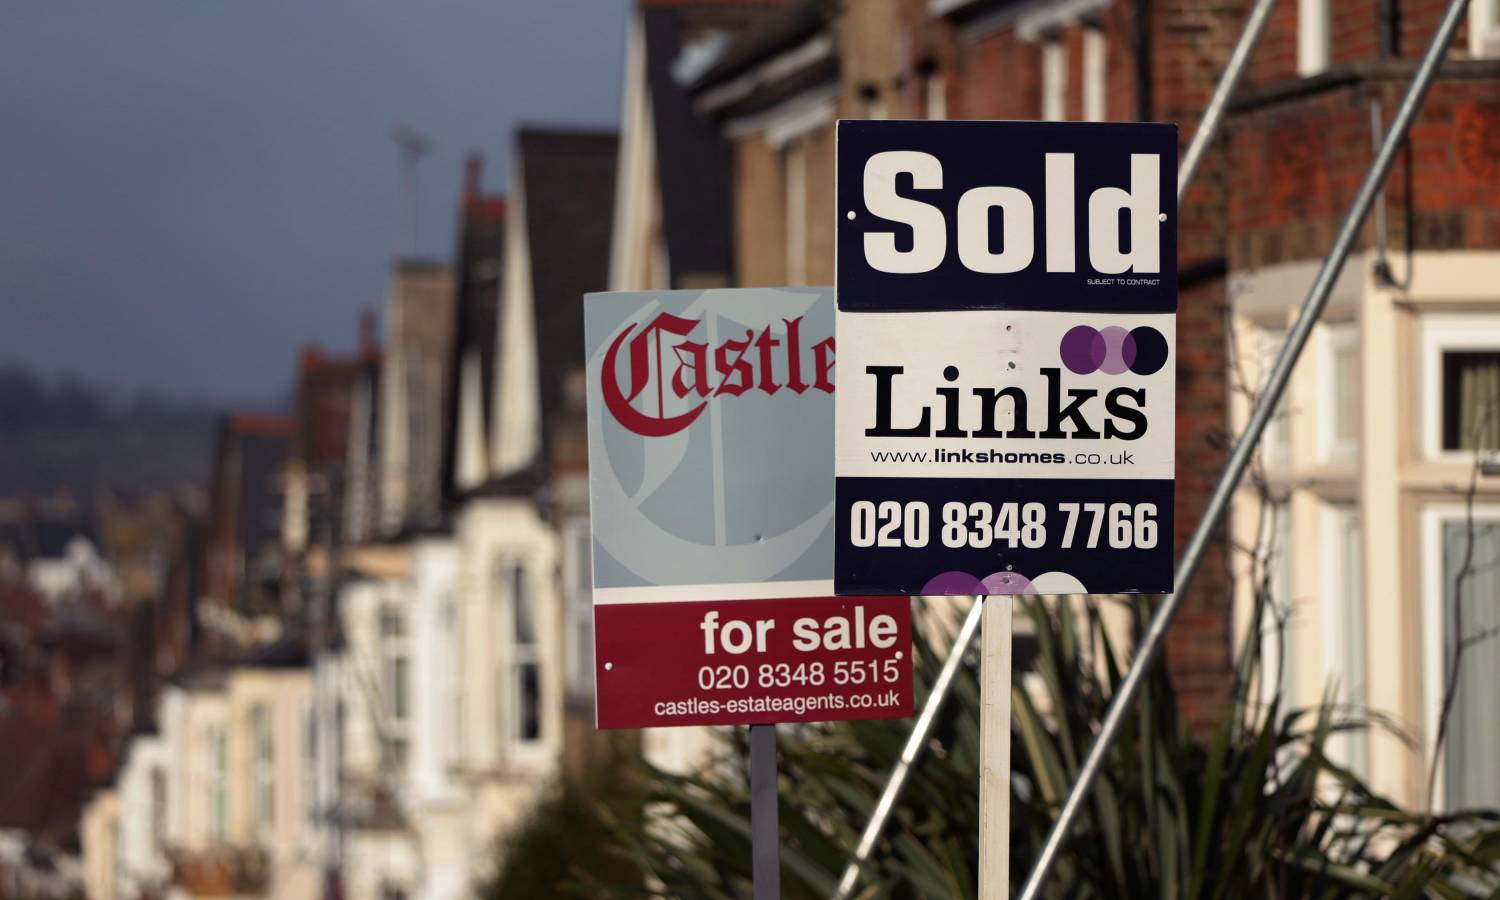 House prices in London experience biggest drop in a decade as after-lockdown mini-boom ceases